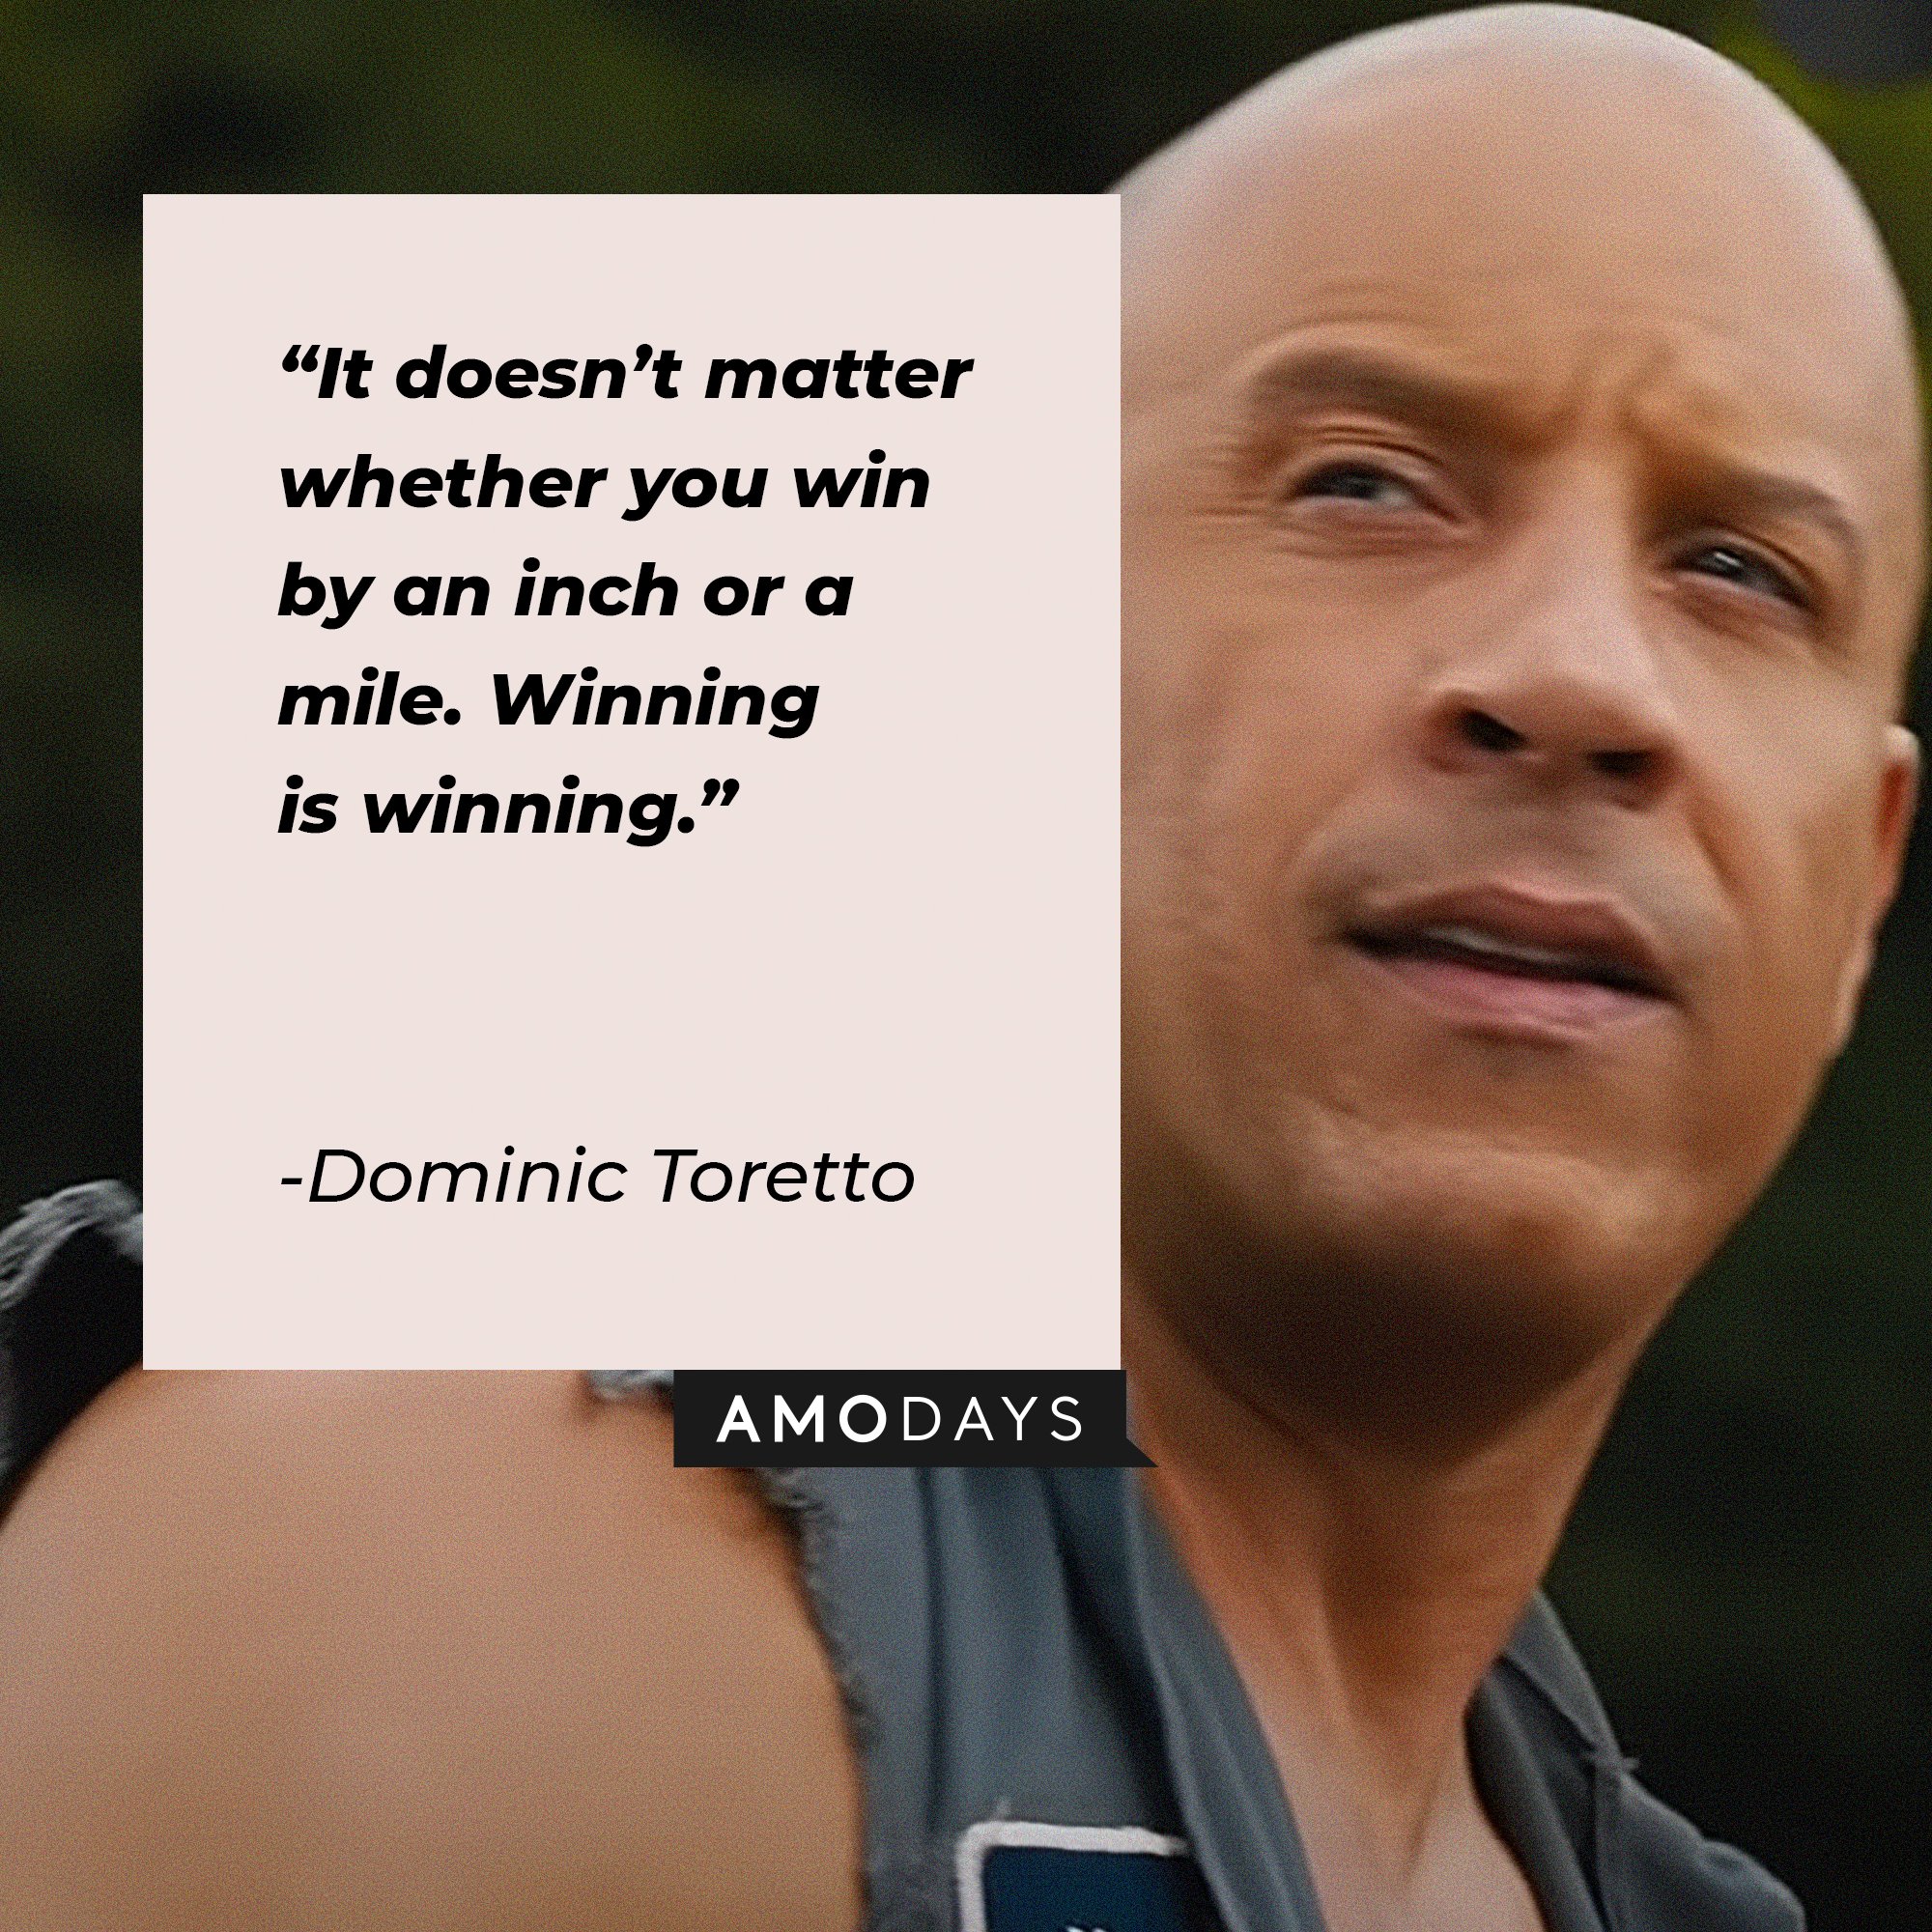 Dominic Toretto’s quote: “It doesn’t matter whether you win by an inch or a mile. Winning is winning.” │ Image: AmoDays